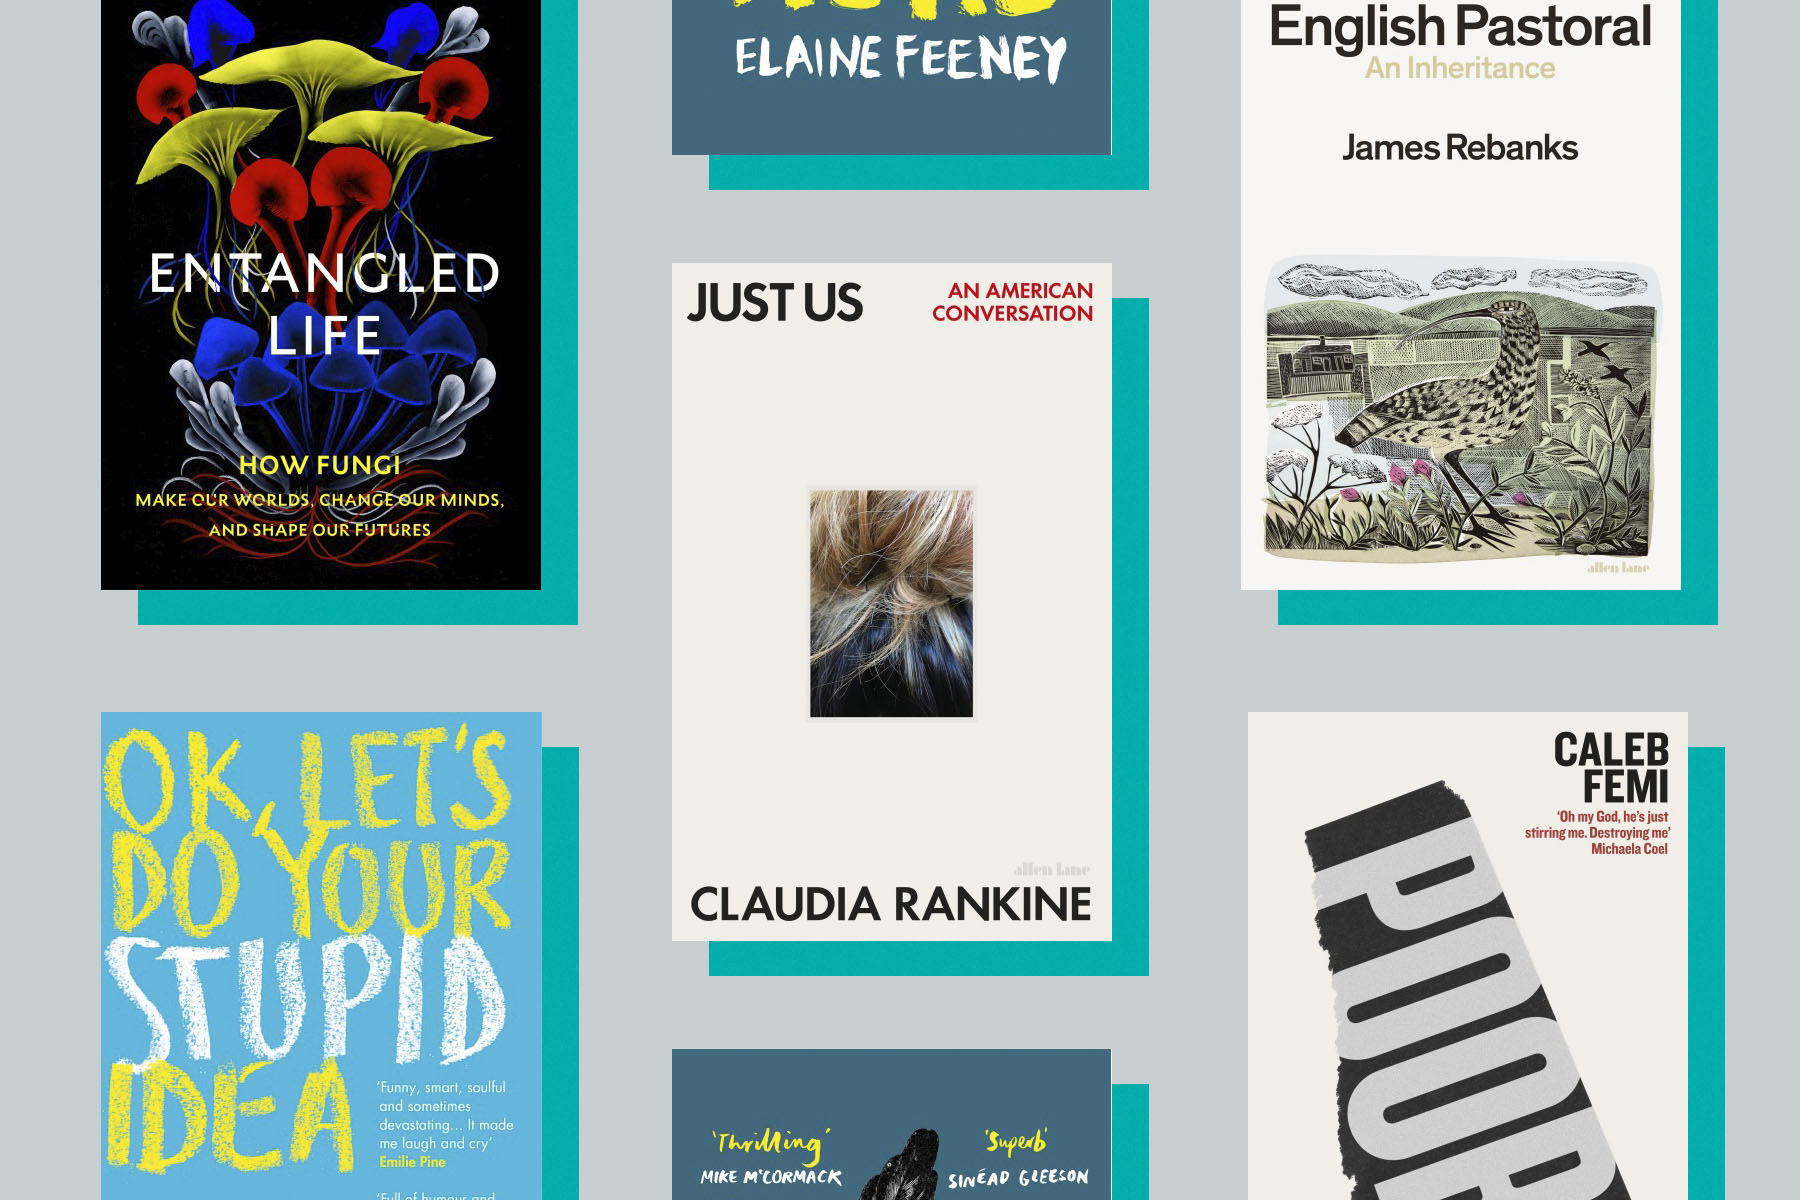 Books longlisted for the Rathbones Folio Prize 2021.